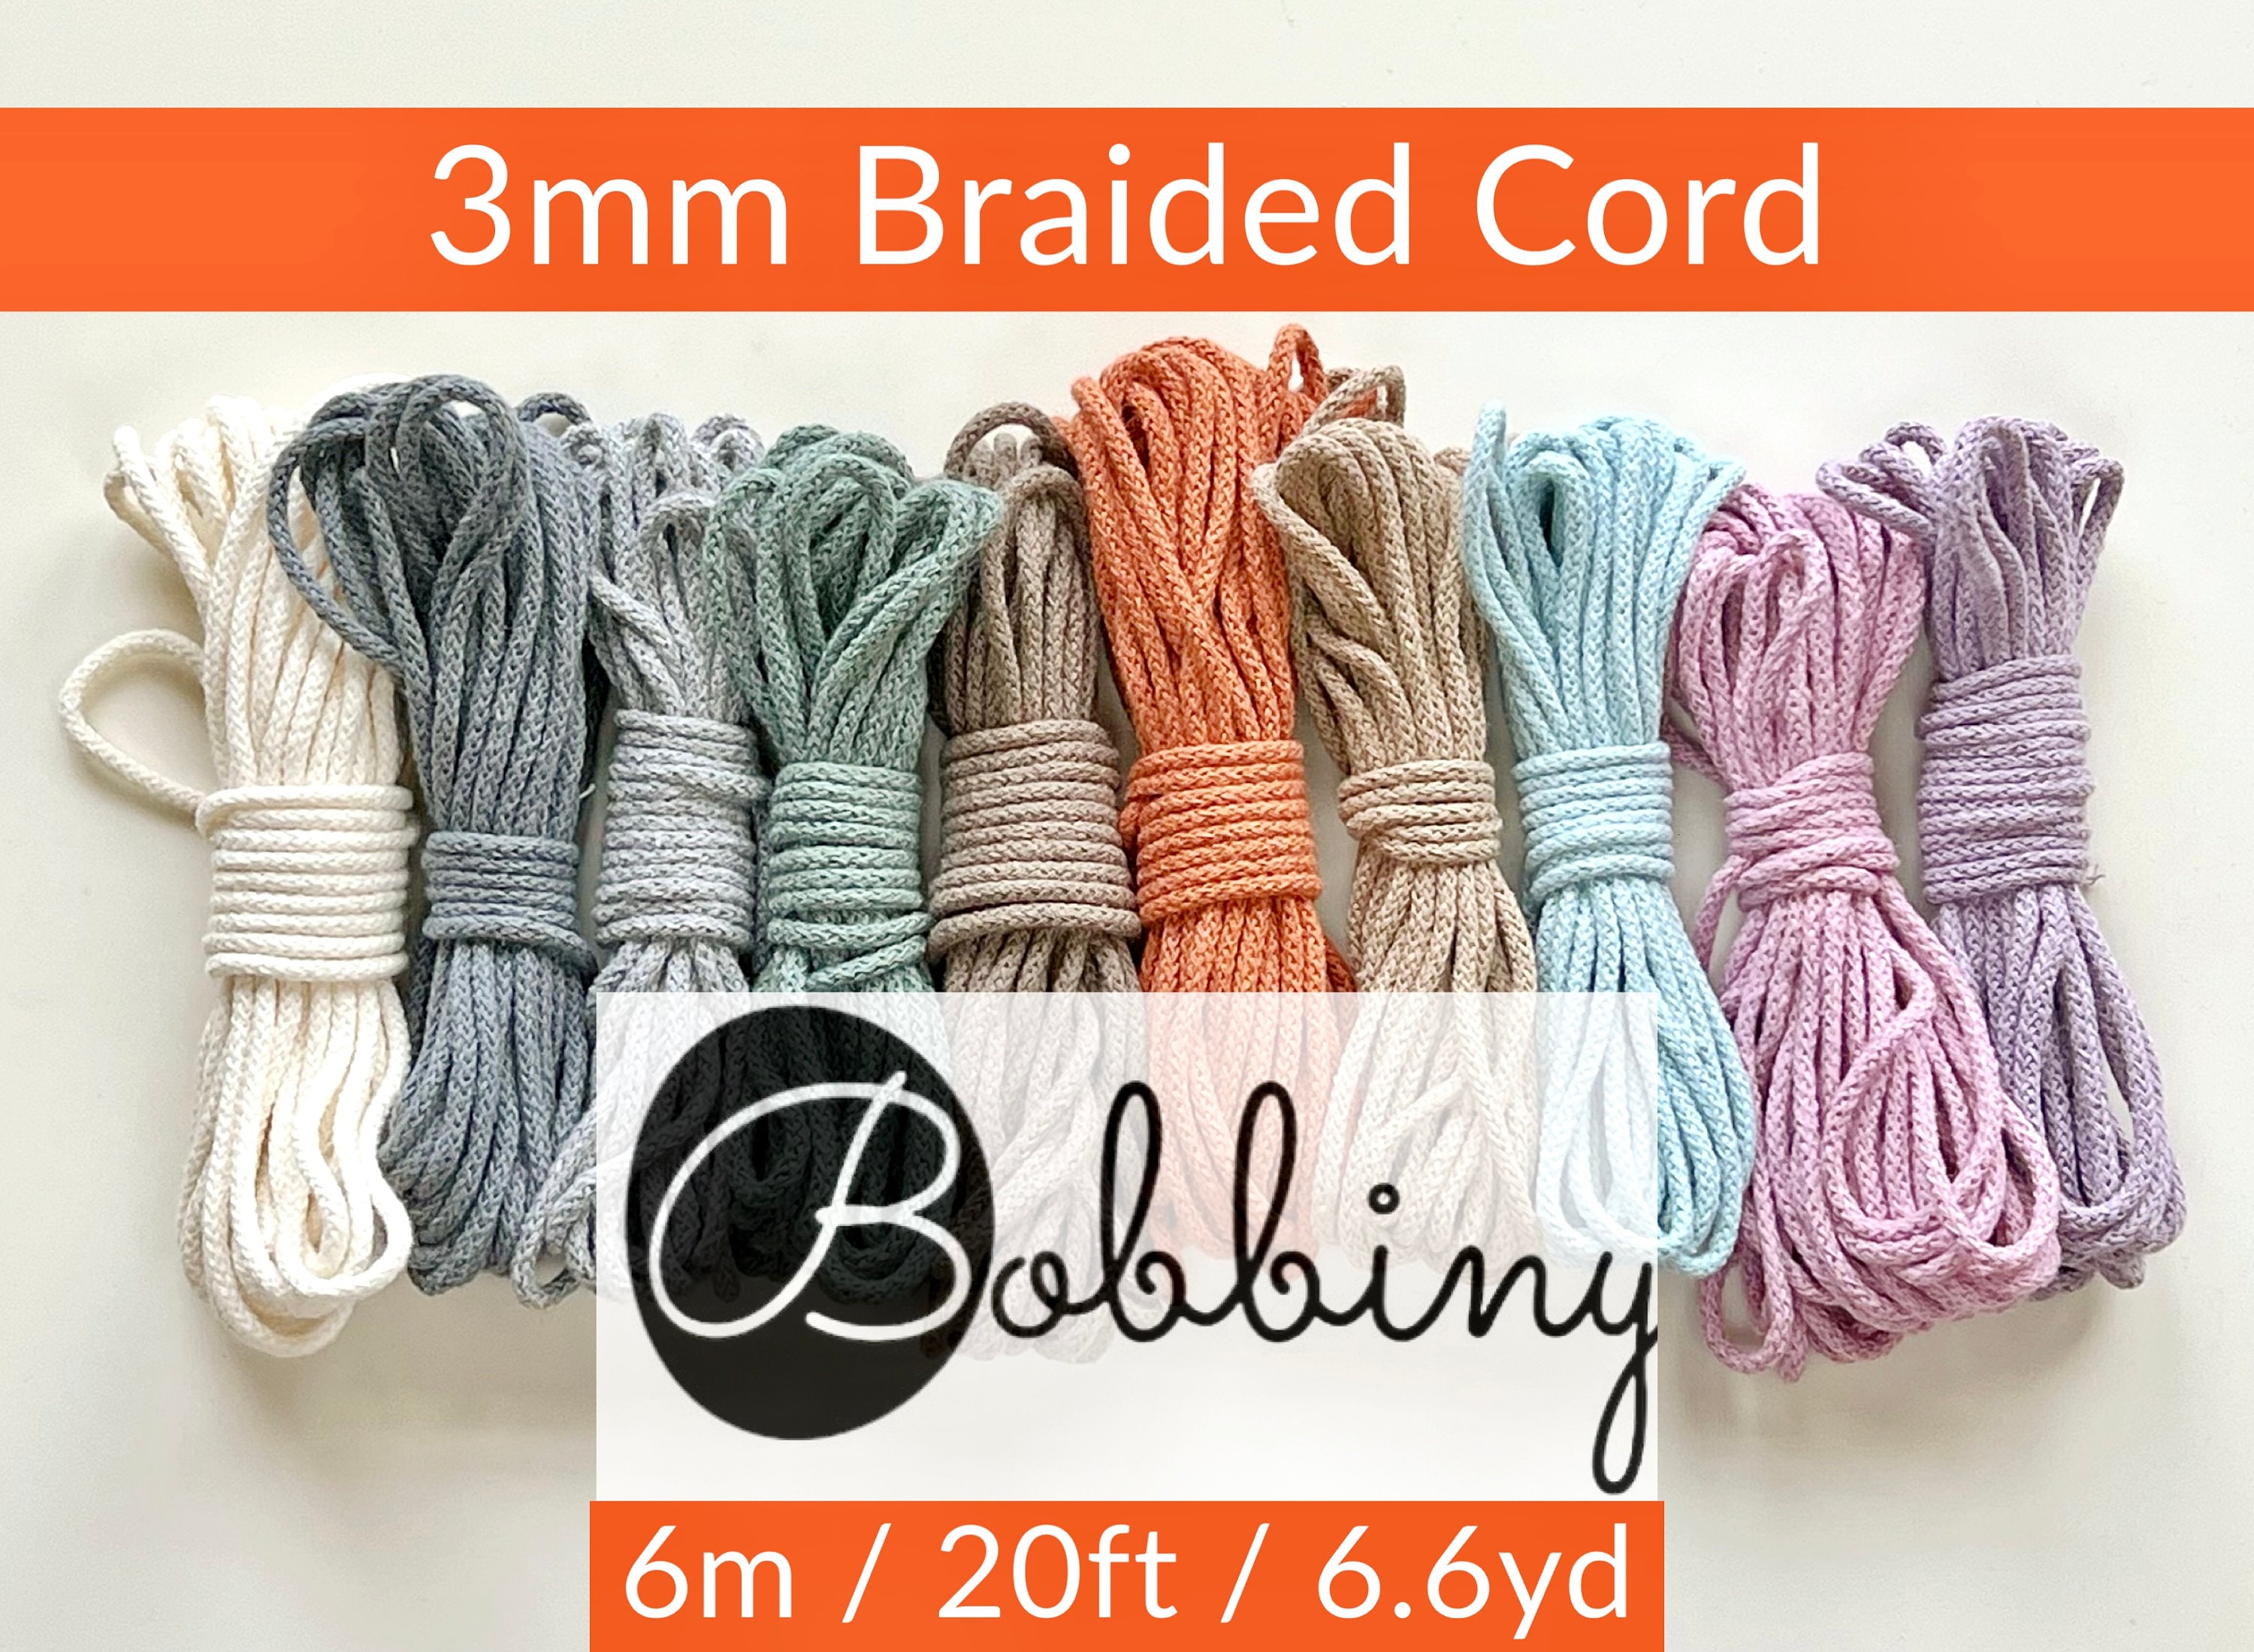 BOBBINY 3mm Braided Cord 1 Ct 20ft, 6m, 6.6yd Sample Cotton Cord 6